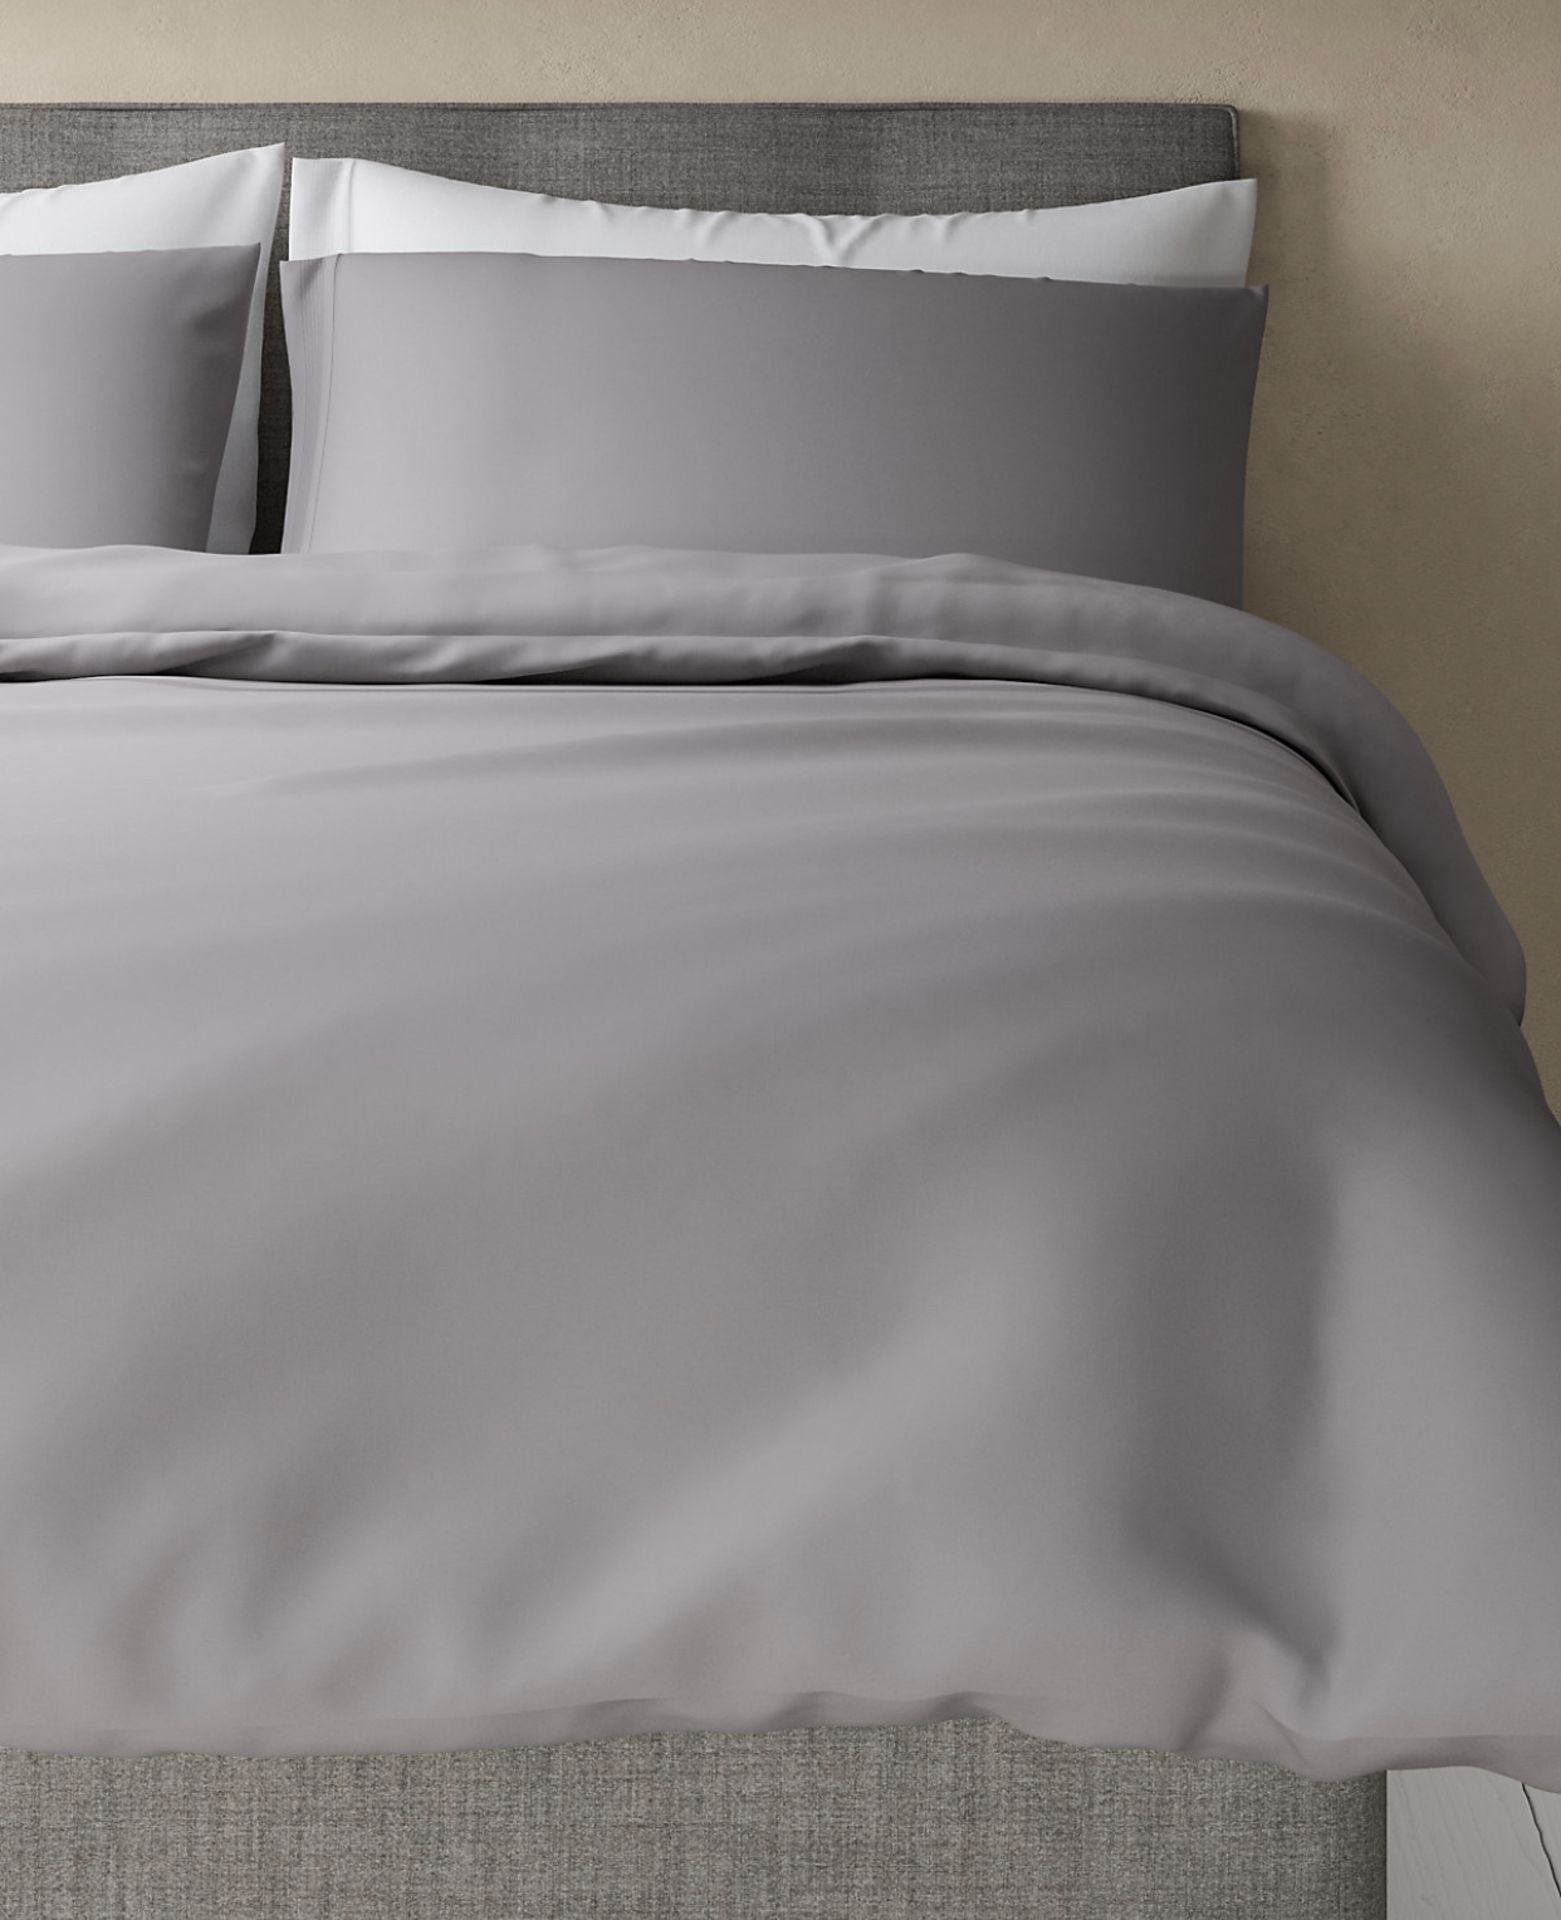 Percale Duvet Cover, King Size